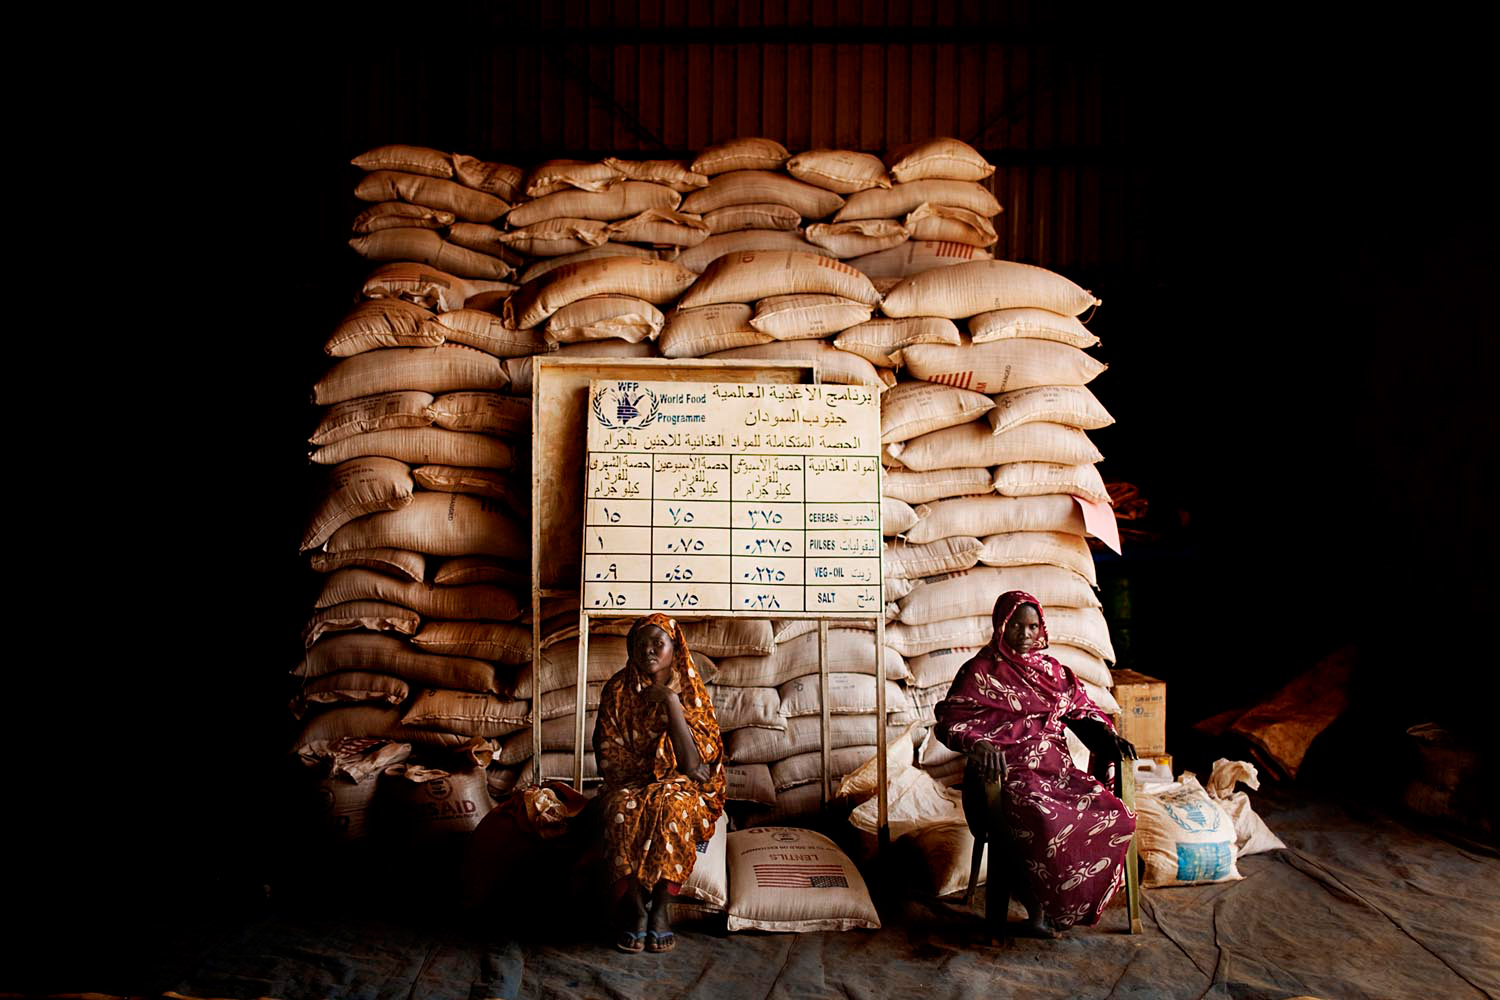 Nuba women sit inside a food storage warehouse in the Yida refugee camp. Food shortages are extreme among refugees fleeing violence in South Kordofan.